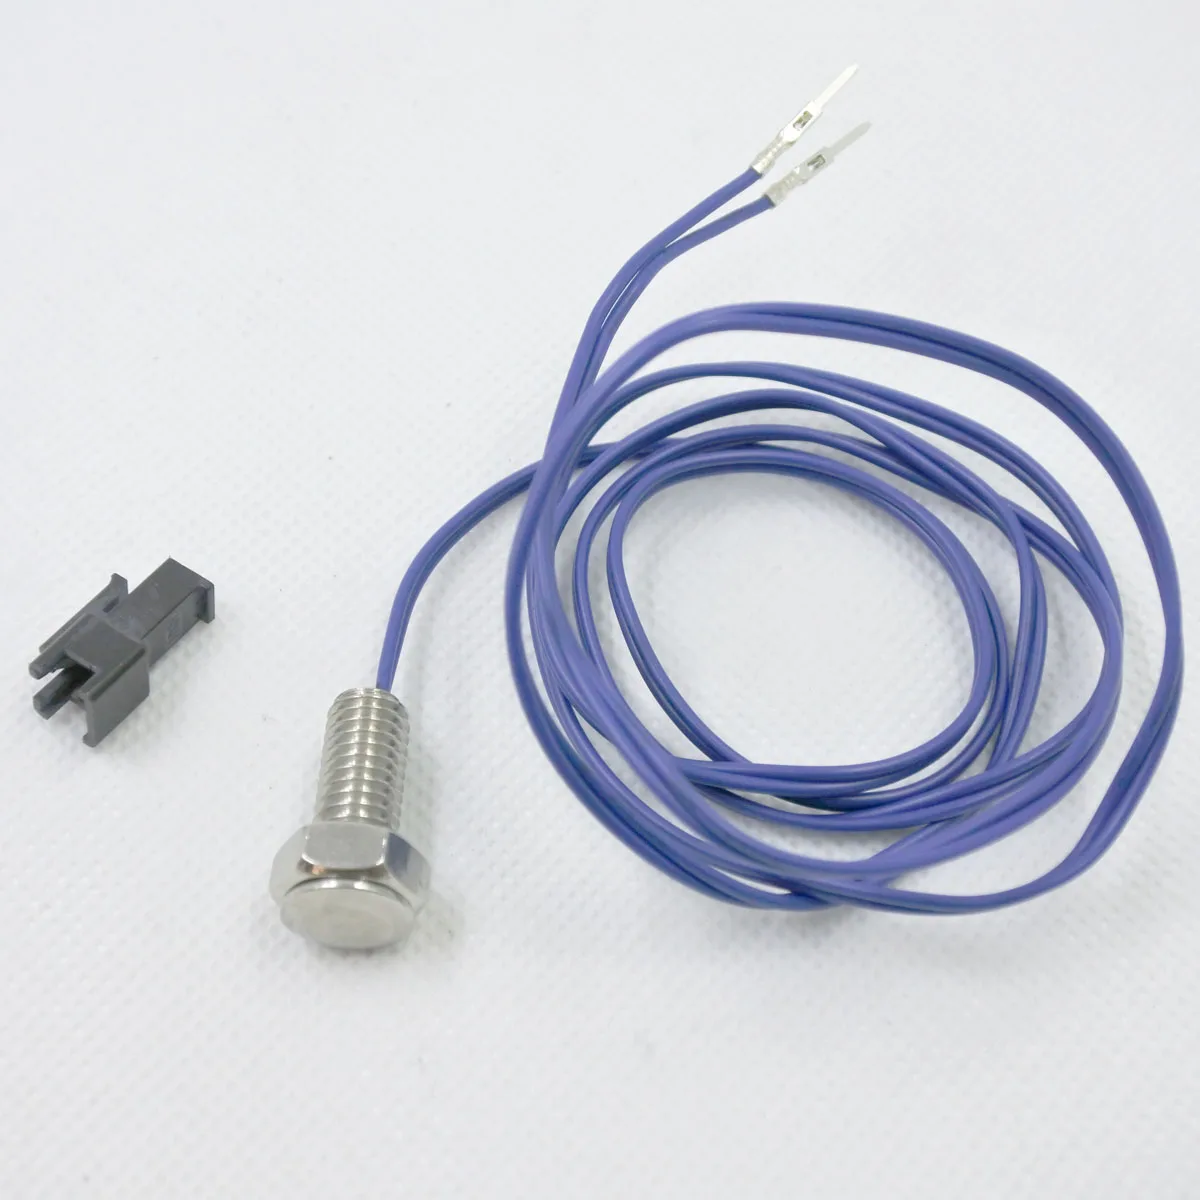 

Hot tub water protection probe,Spa Water Temperature Sensor for control pack of Winer, JNJ KL8-2 TCP8-2 KL8-3 TCP8-3